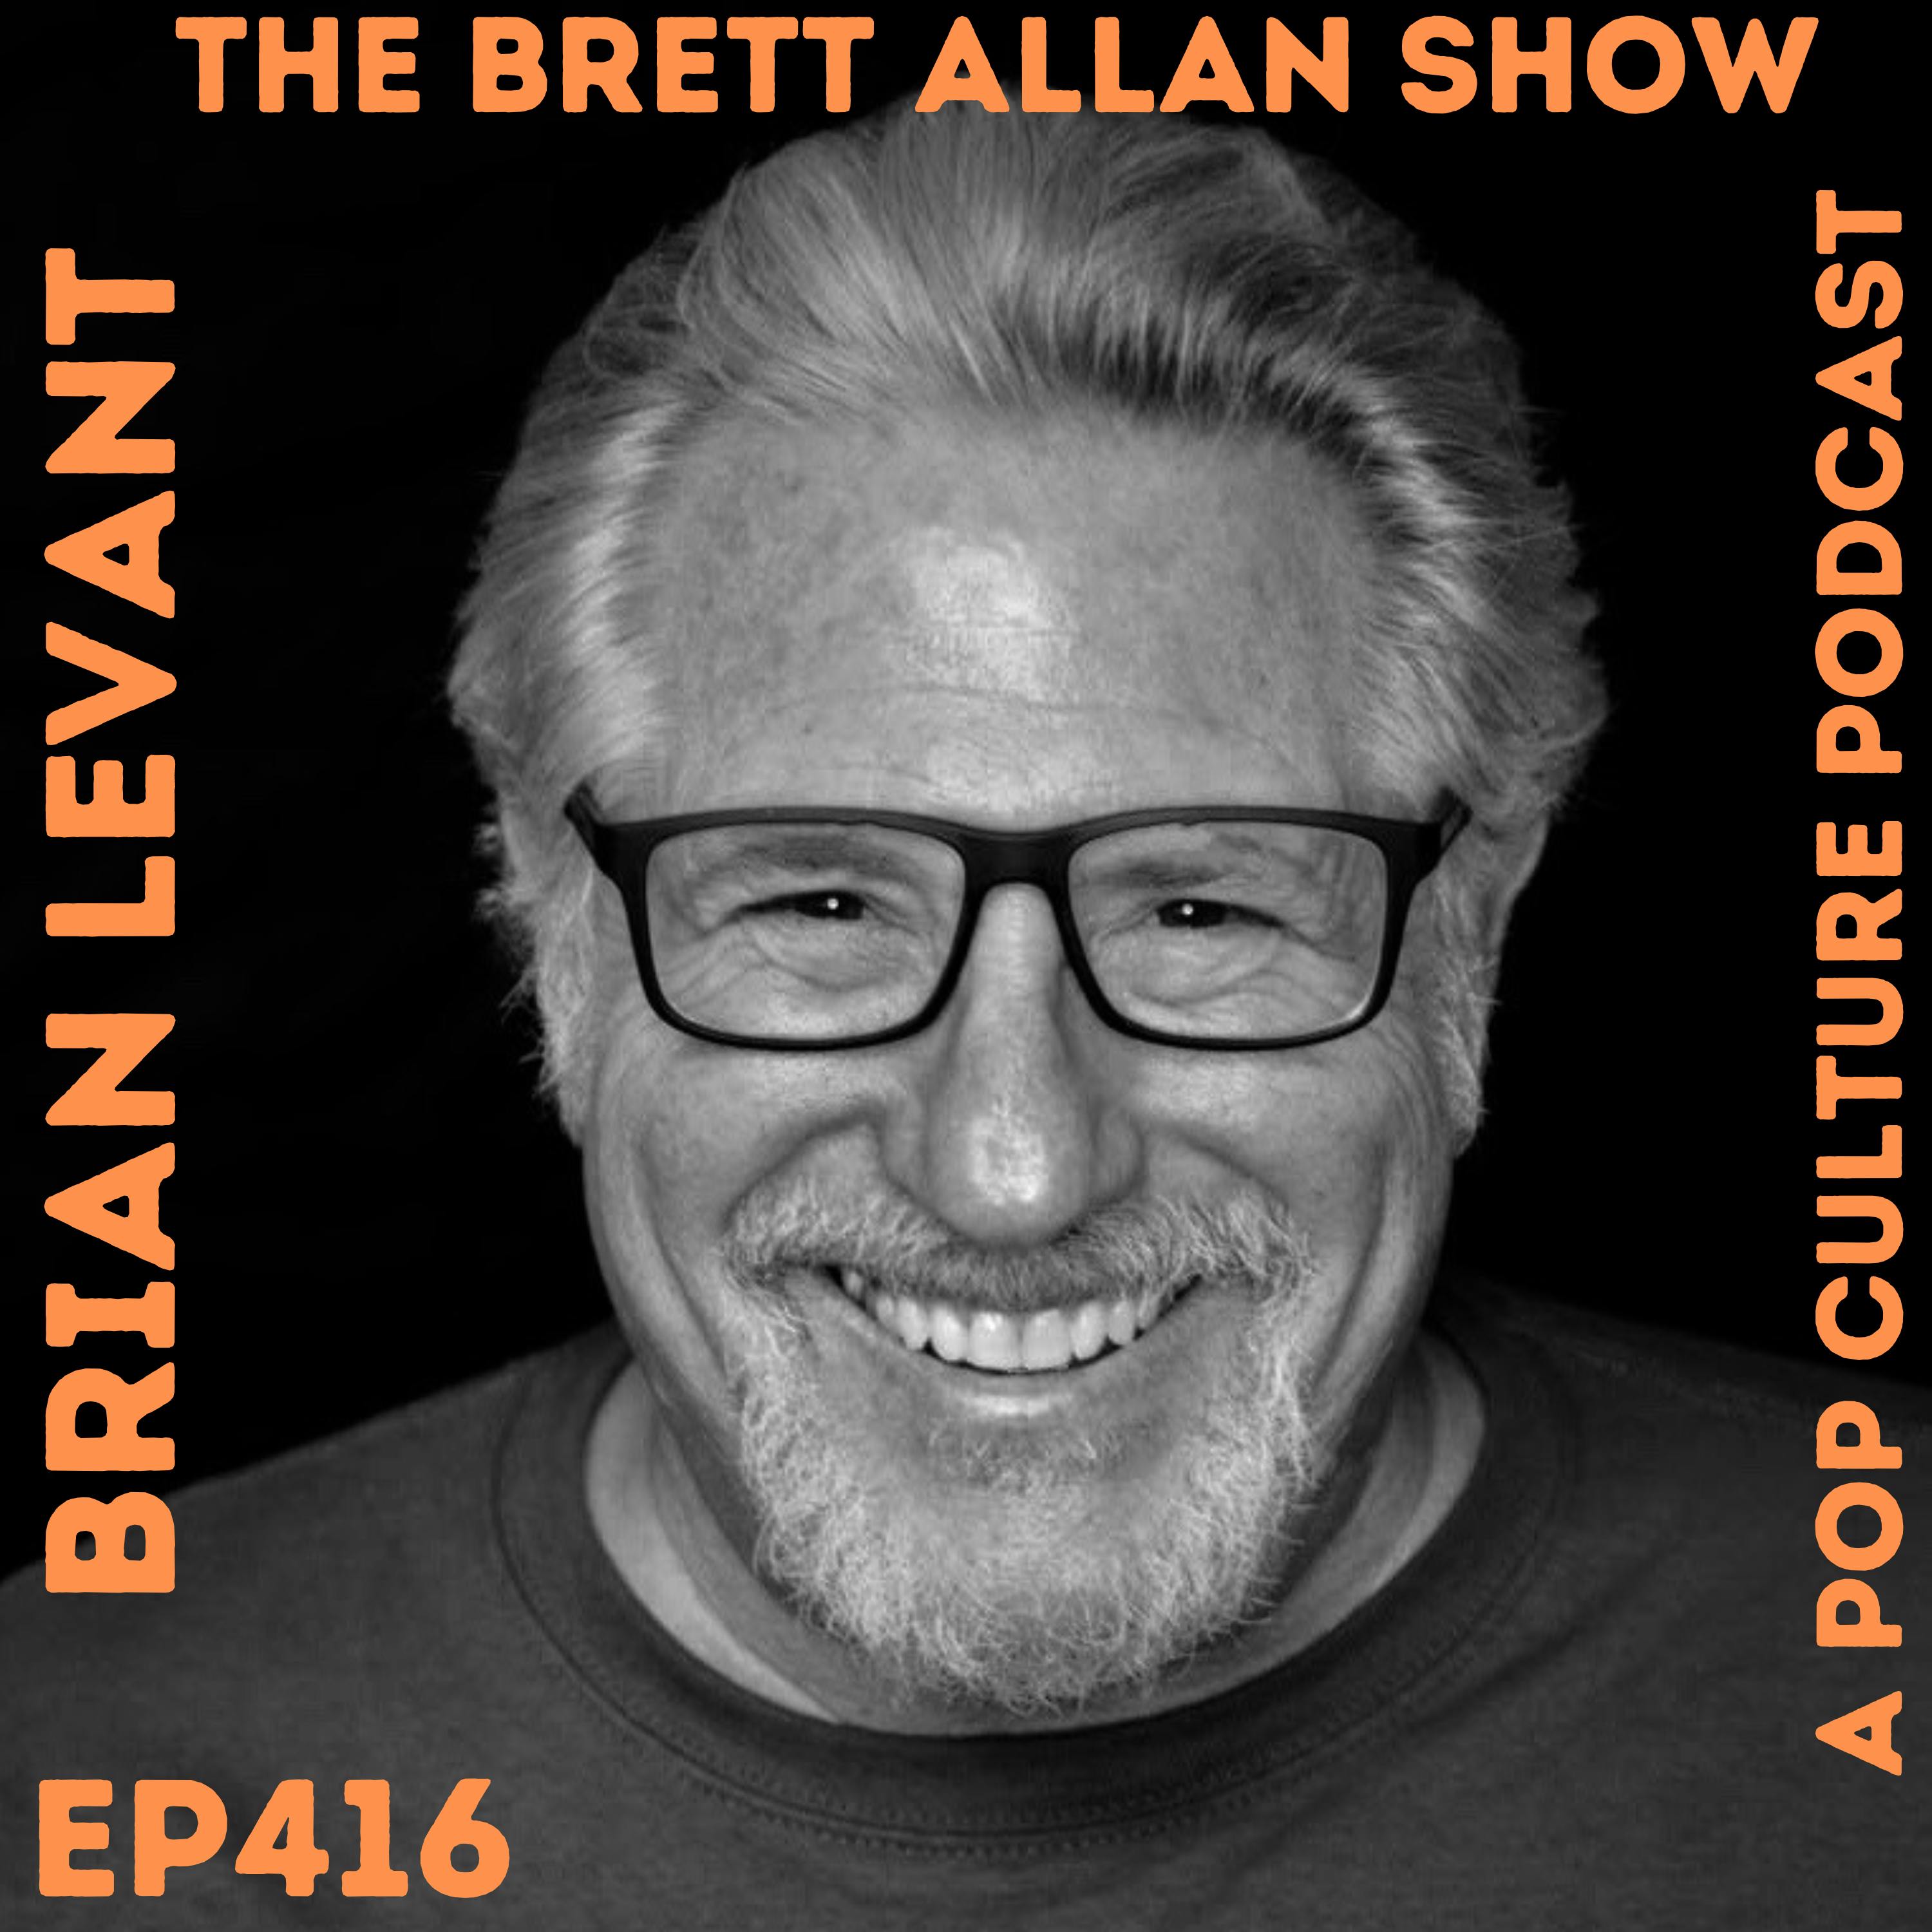 Brian Levant Discuses His New Book "My Life and Toys", Via Rock Vegas, Jingle All the Way and More!